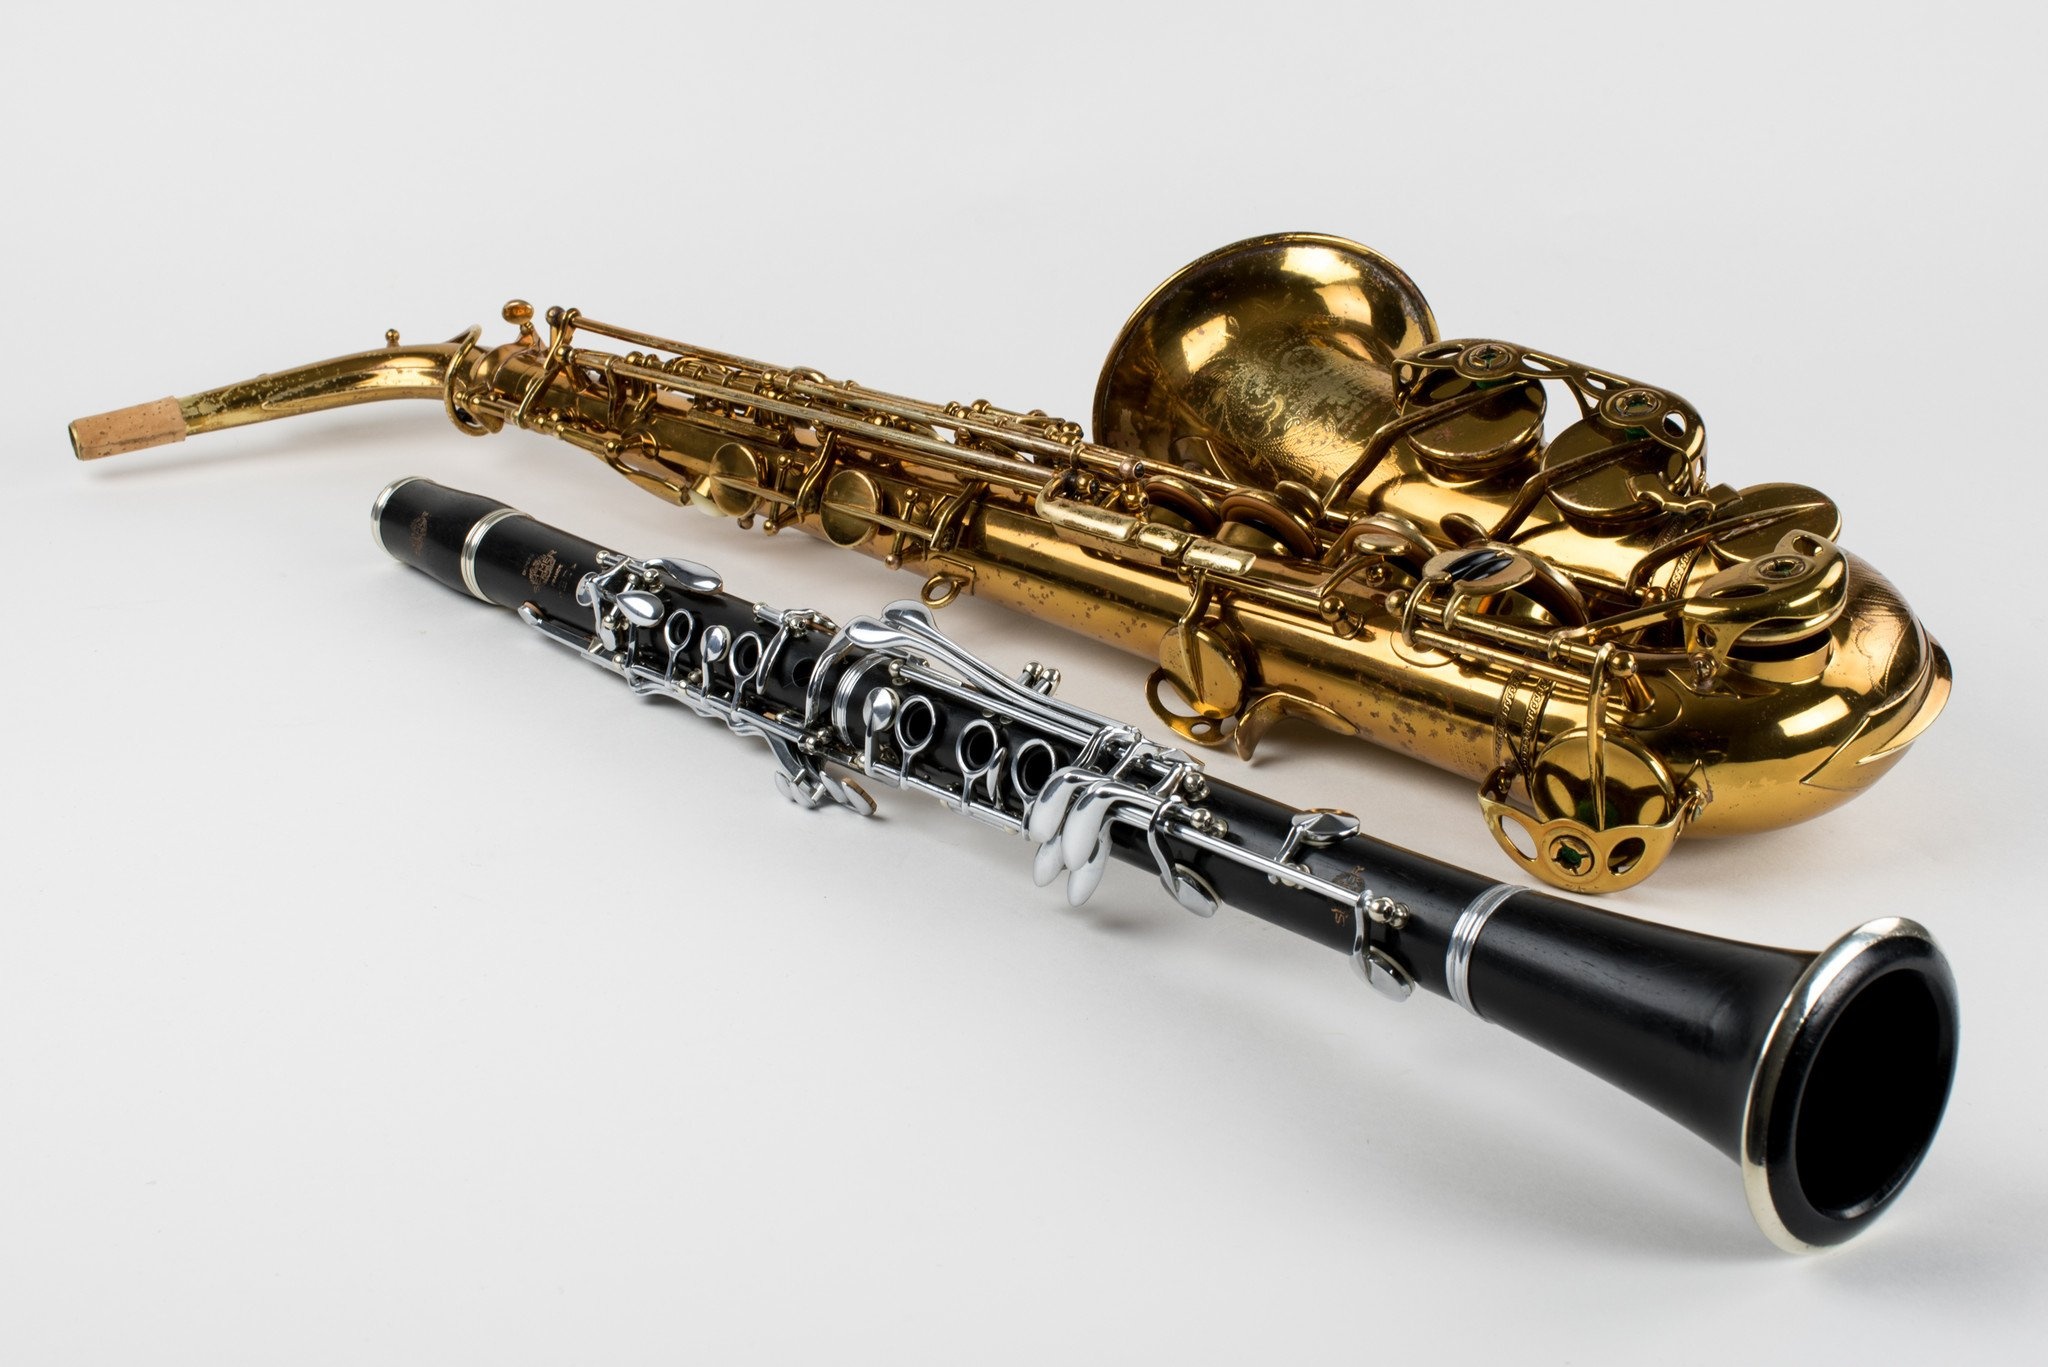 Saxophone: A brass instrument played by blowing into a mouthpiece and pressing keys to form musical notes. 2050x1370 HD Wallpaper.